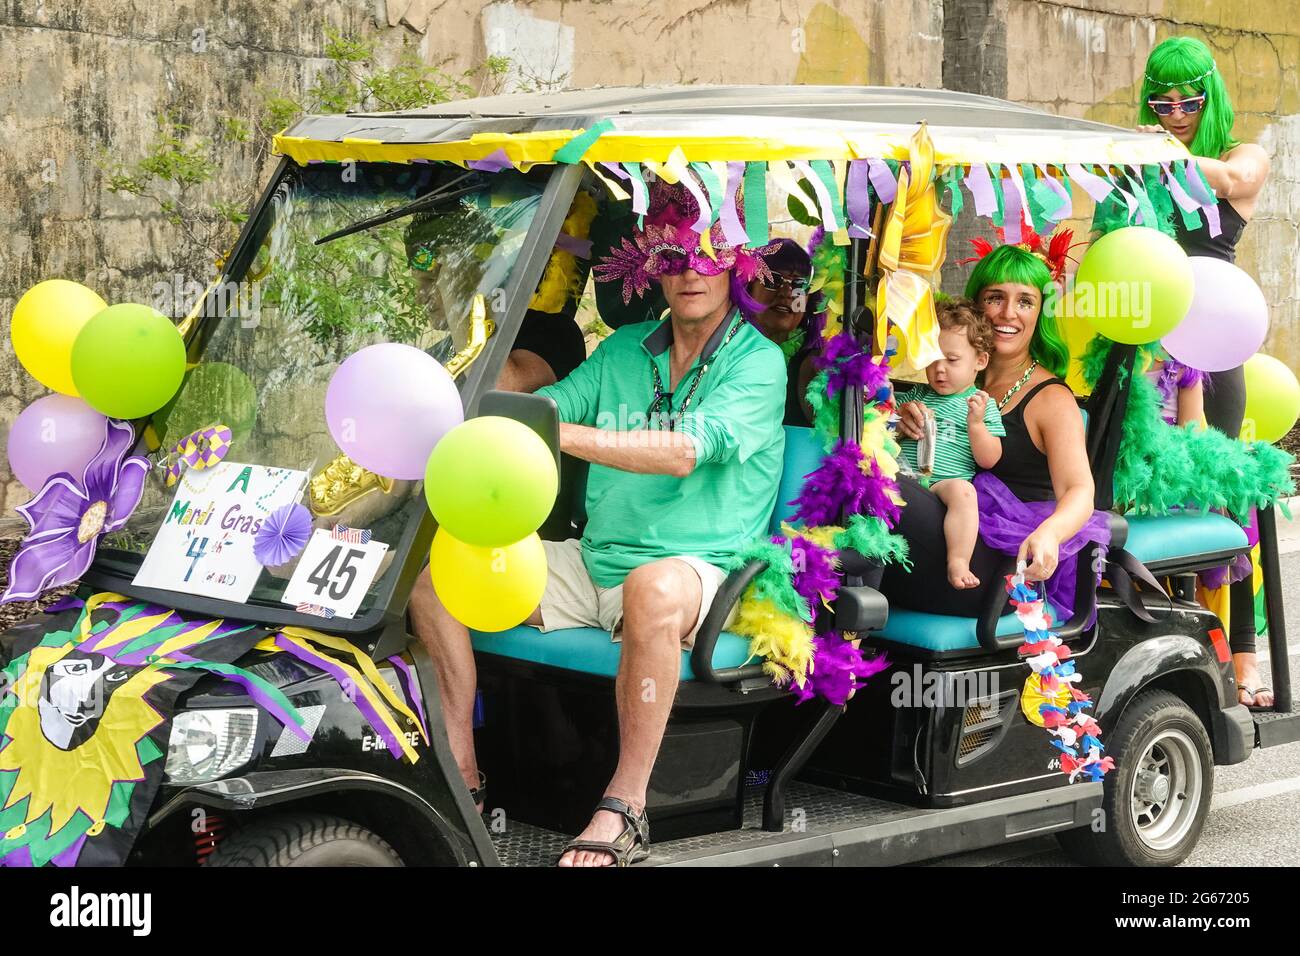 Sullivans Island, South Carolina, USA. 3rd July, 2021. A family drives their golf cart decorated in a Mardi Gras theme during the annual Bicycle and Golf cart parade celebrating Independence Day July 3, 2021 in Sullivans Island, South Carolina. Credit: Planetpix/Alamy Live News Stock Photo